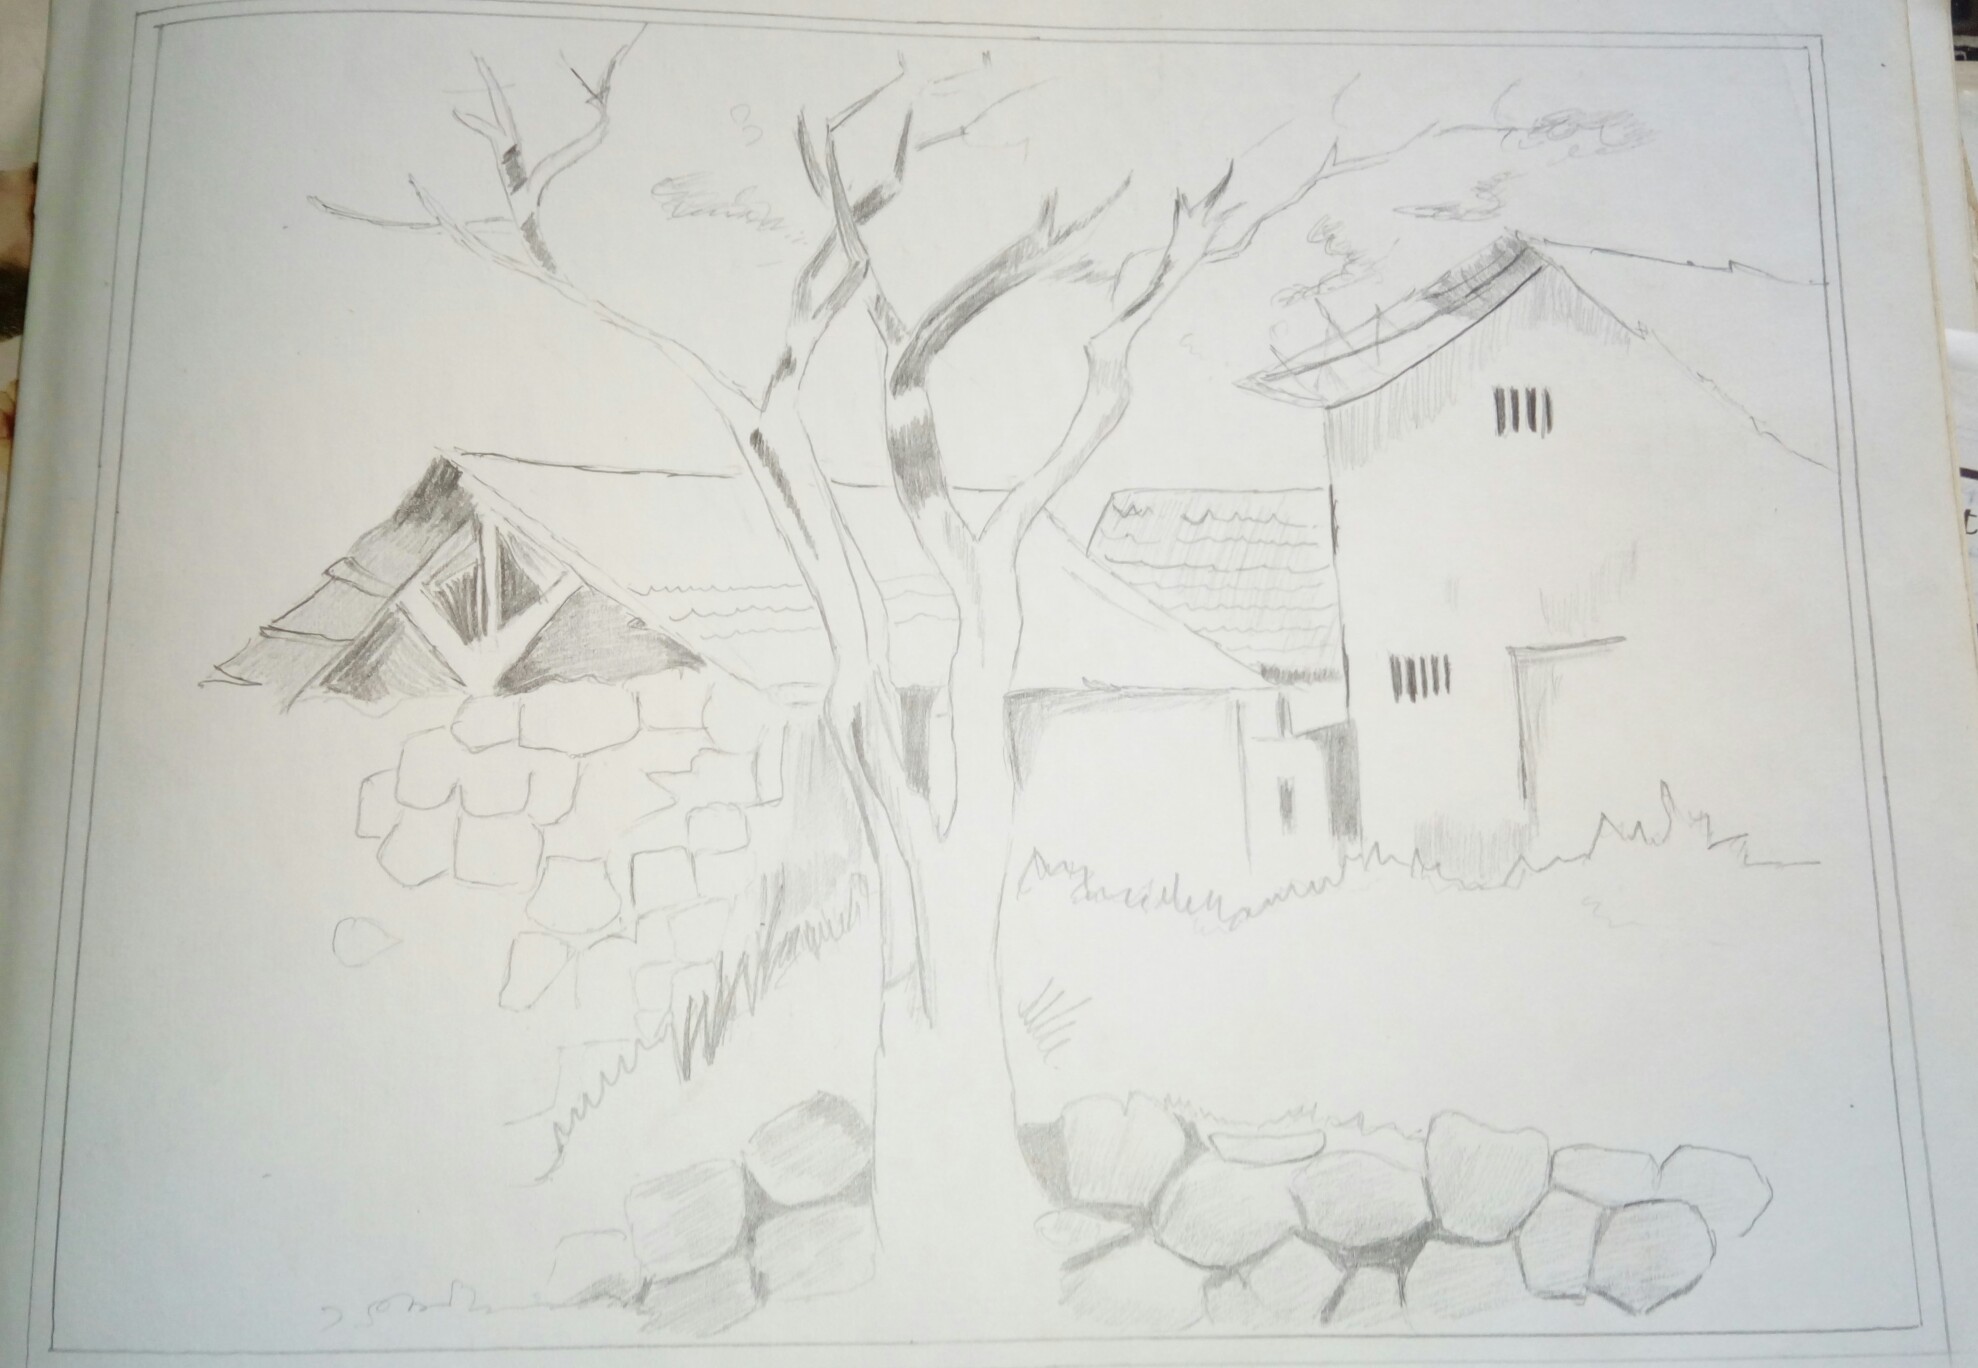 This is a scenery of a village. I have found this picture in a cover of a drawing exercise book. I have tried to recreate it in my own way. Only HB pencil has been used in the picture.